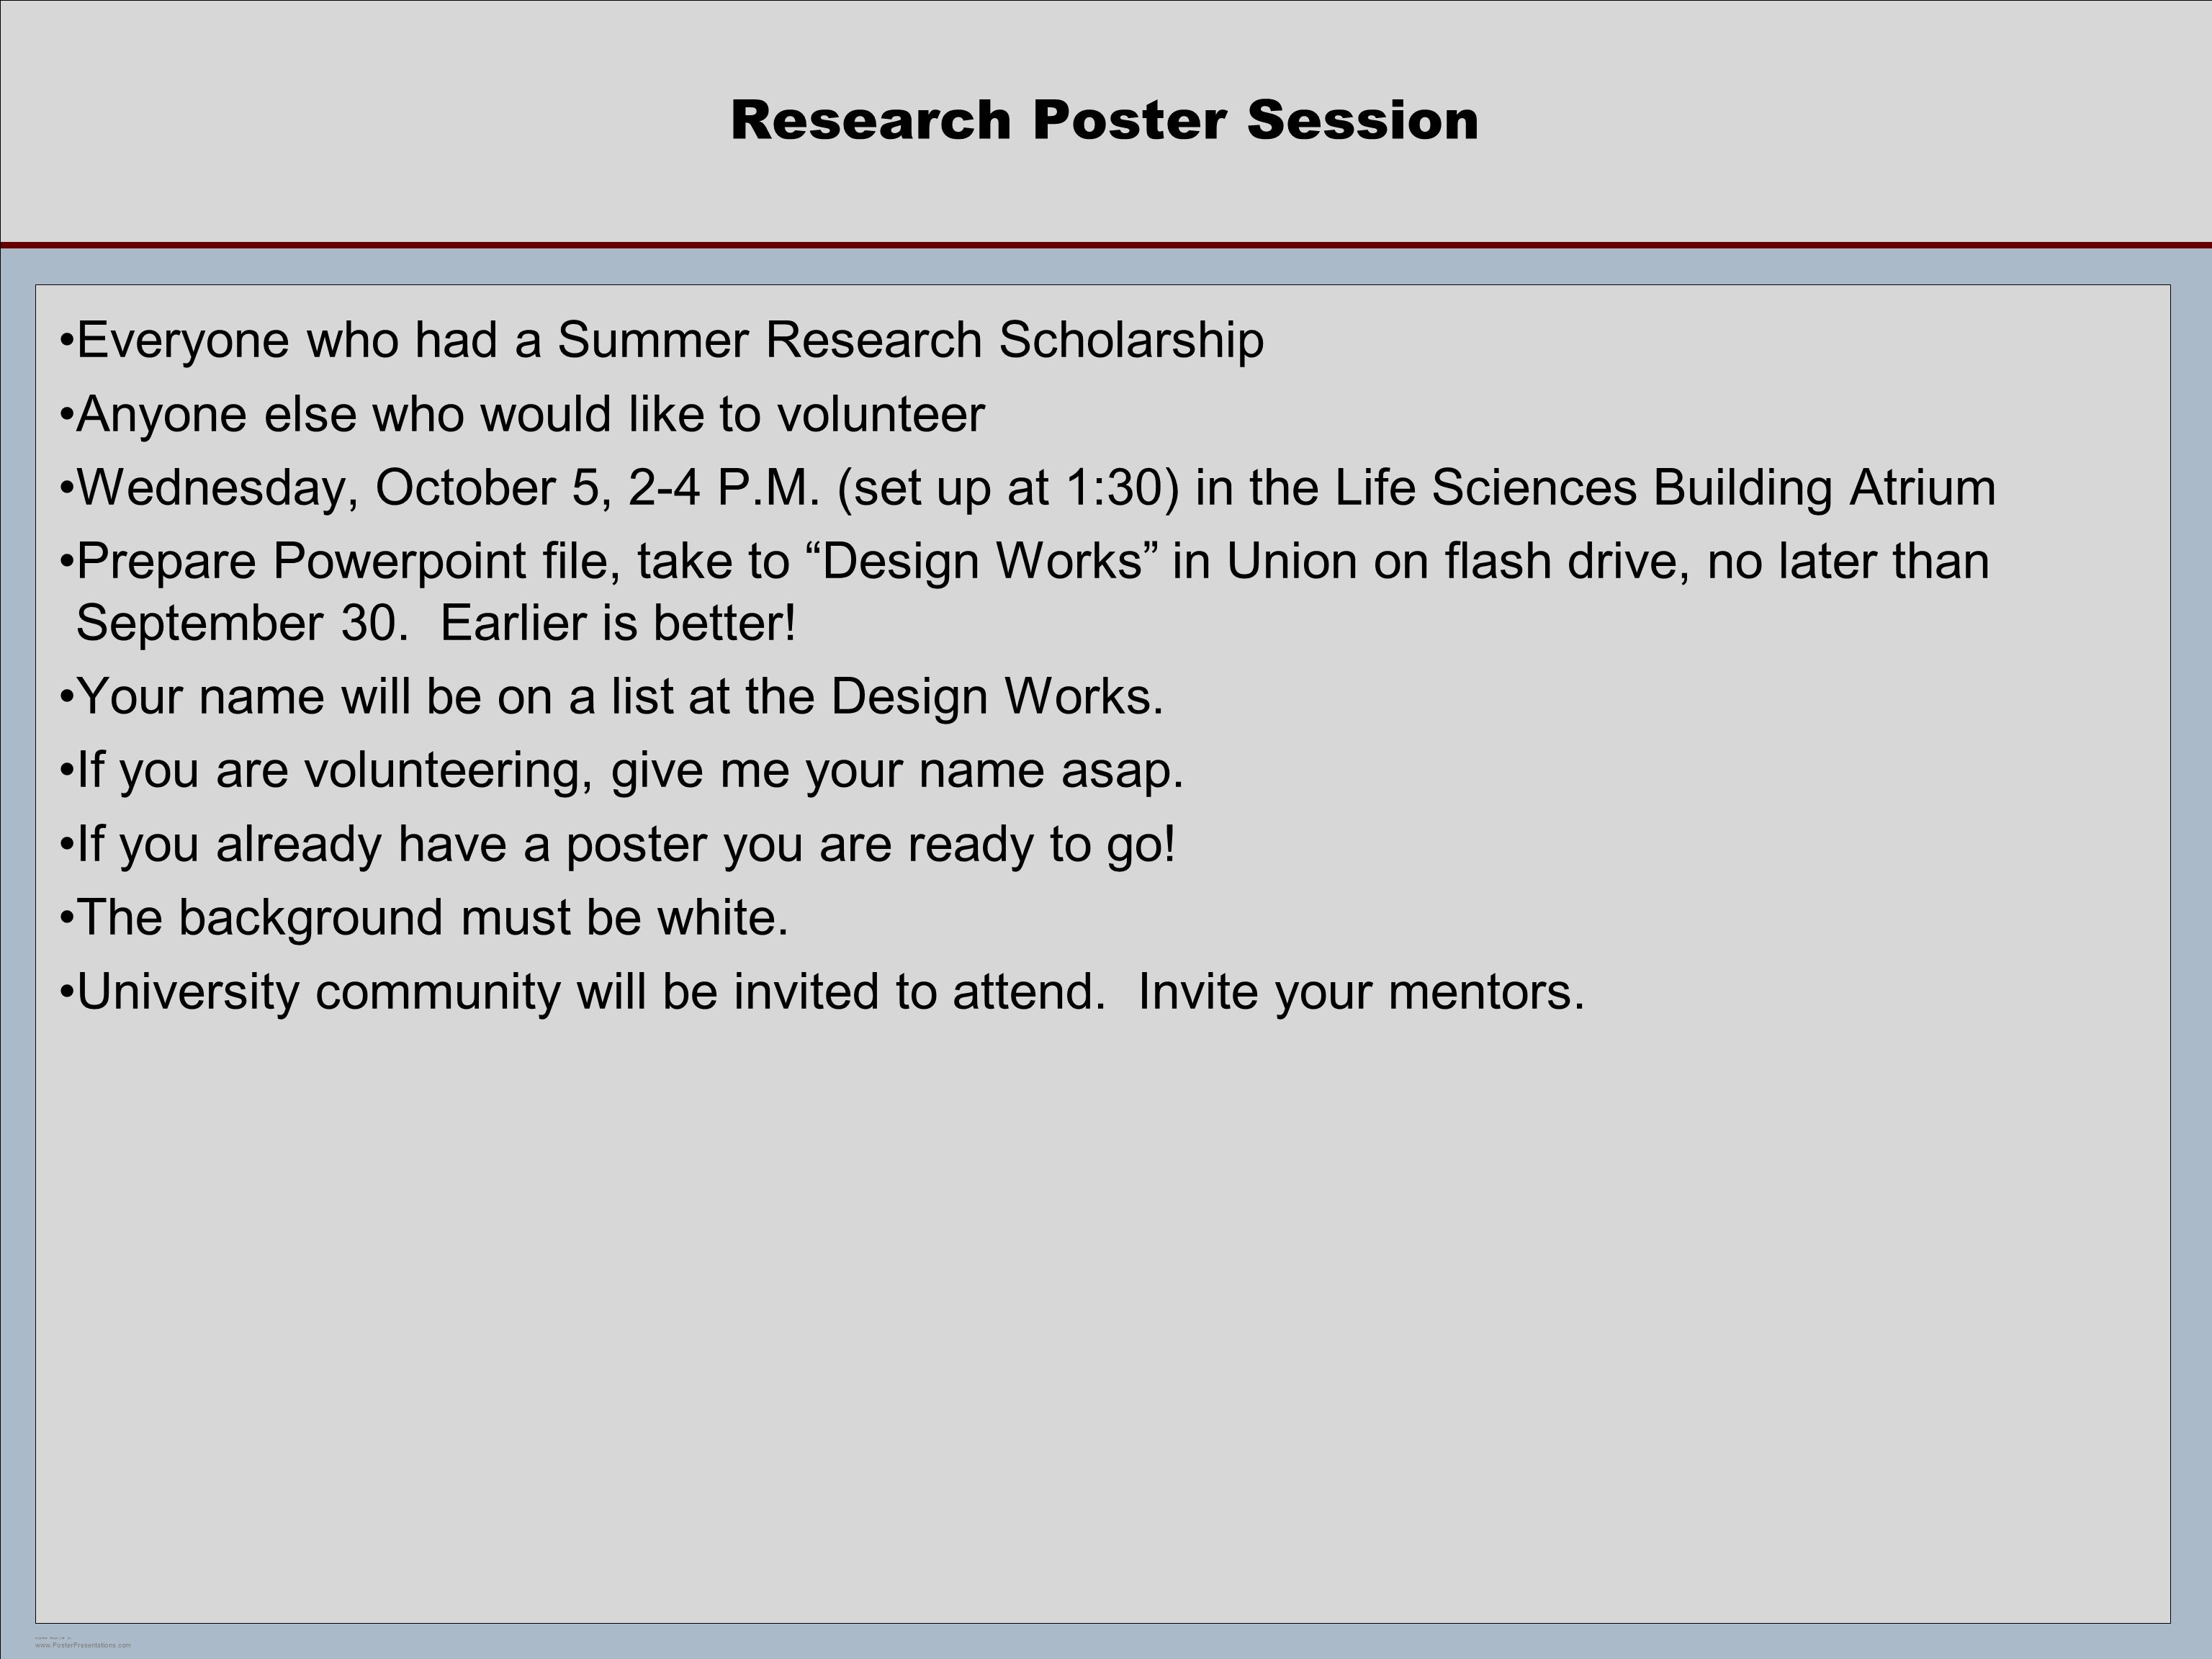 POSTER TEMPLATE BY:   Research Poster Session Everyone who had a Summer Research Scholarship Anyone else who would like to volunteer Wednesday, October 5, 2-4 P.M.